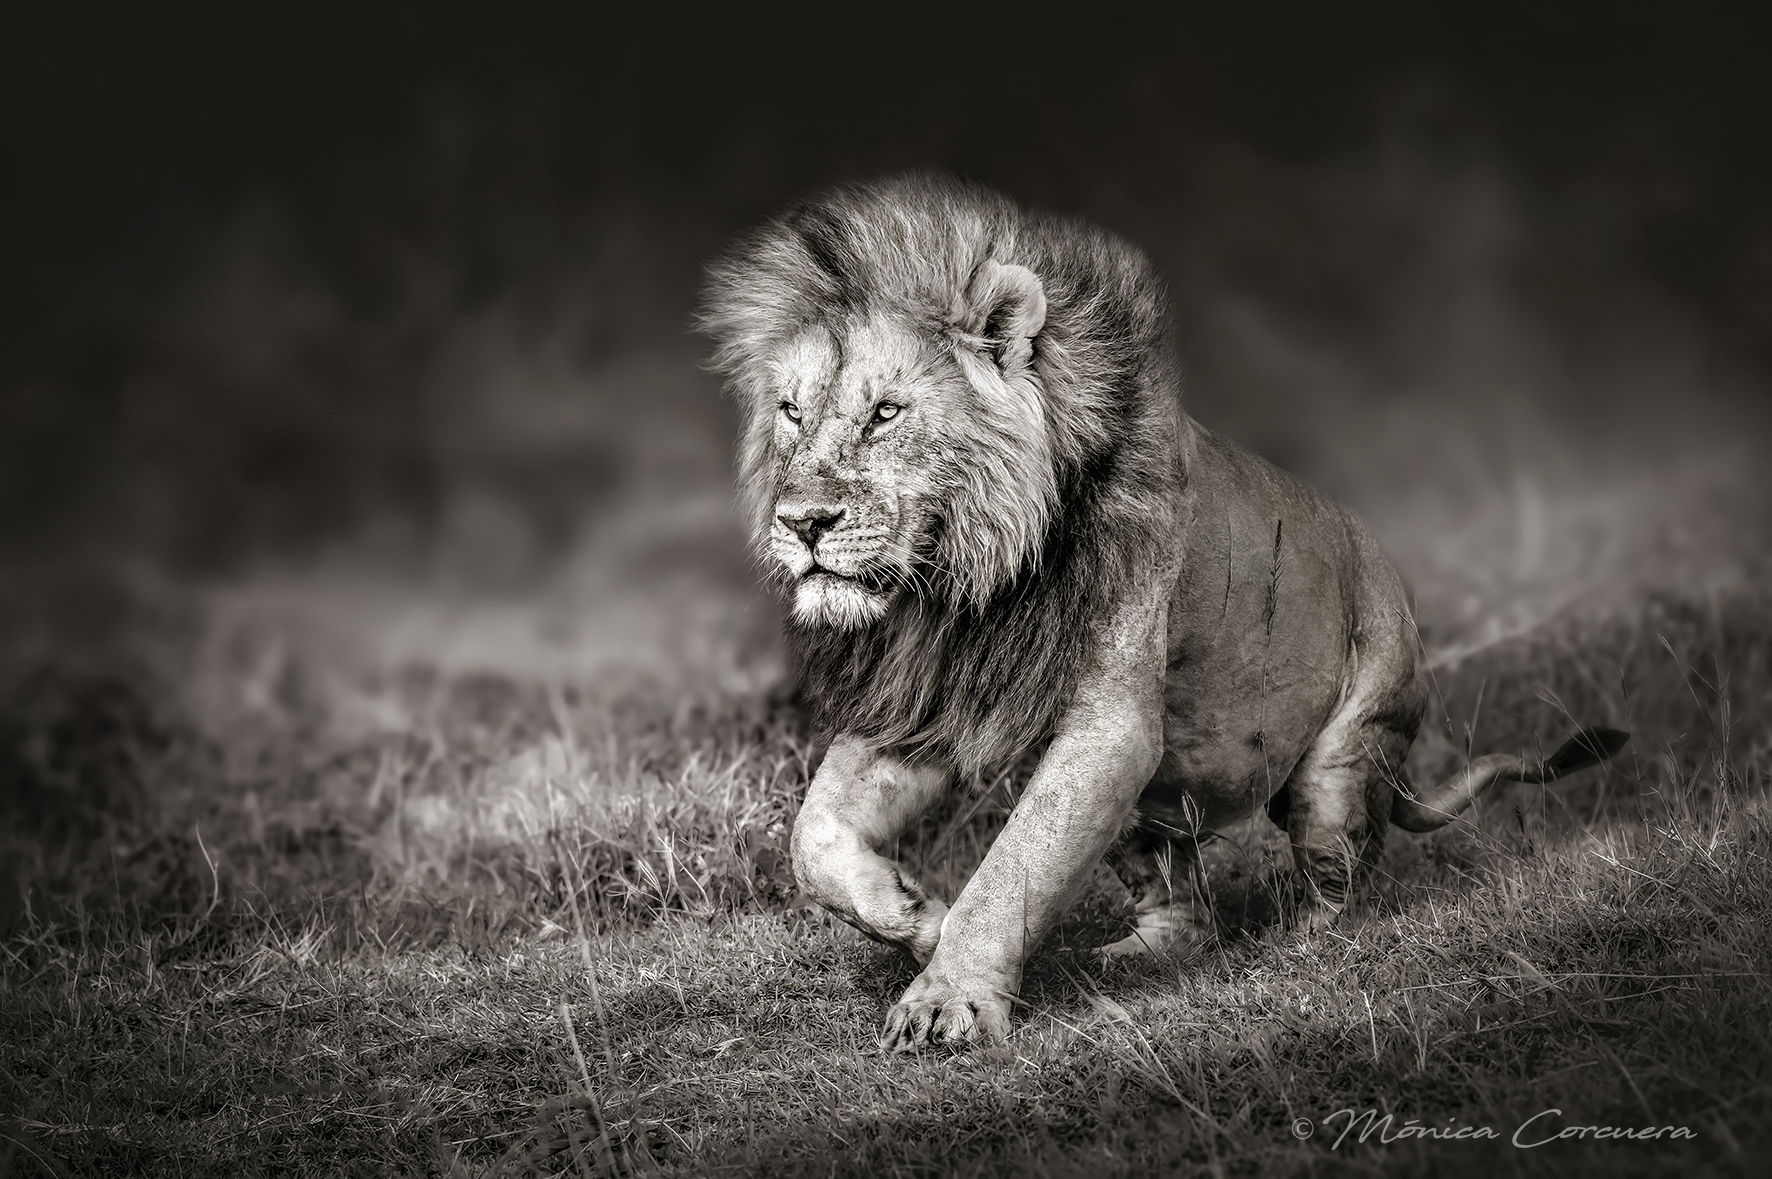 "A TRIBUTE TO THE KING" B&W *010